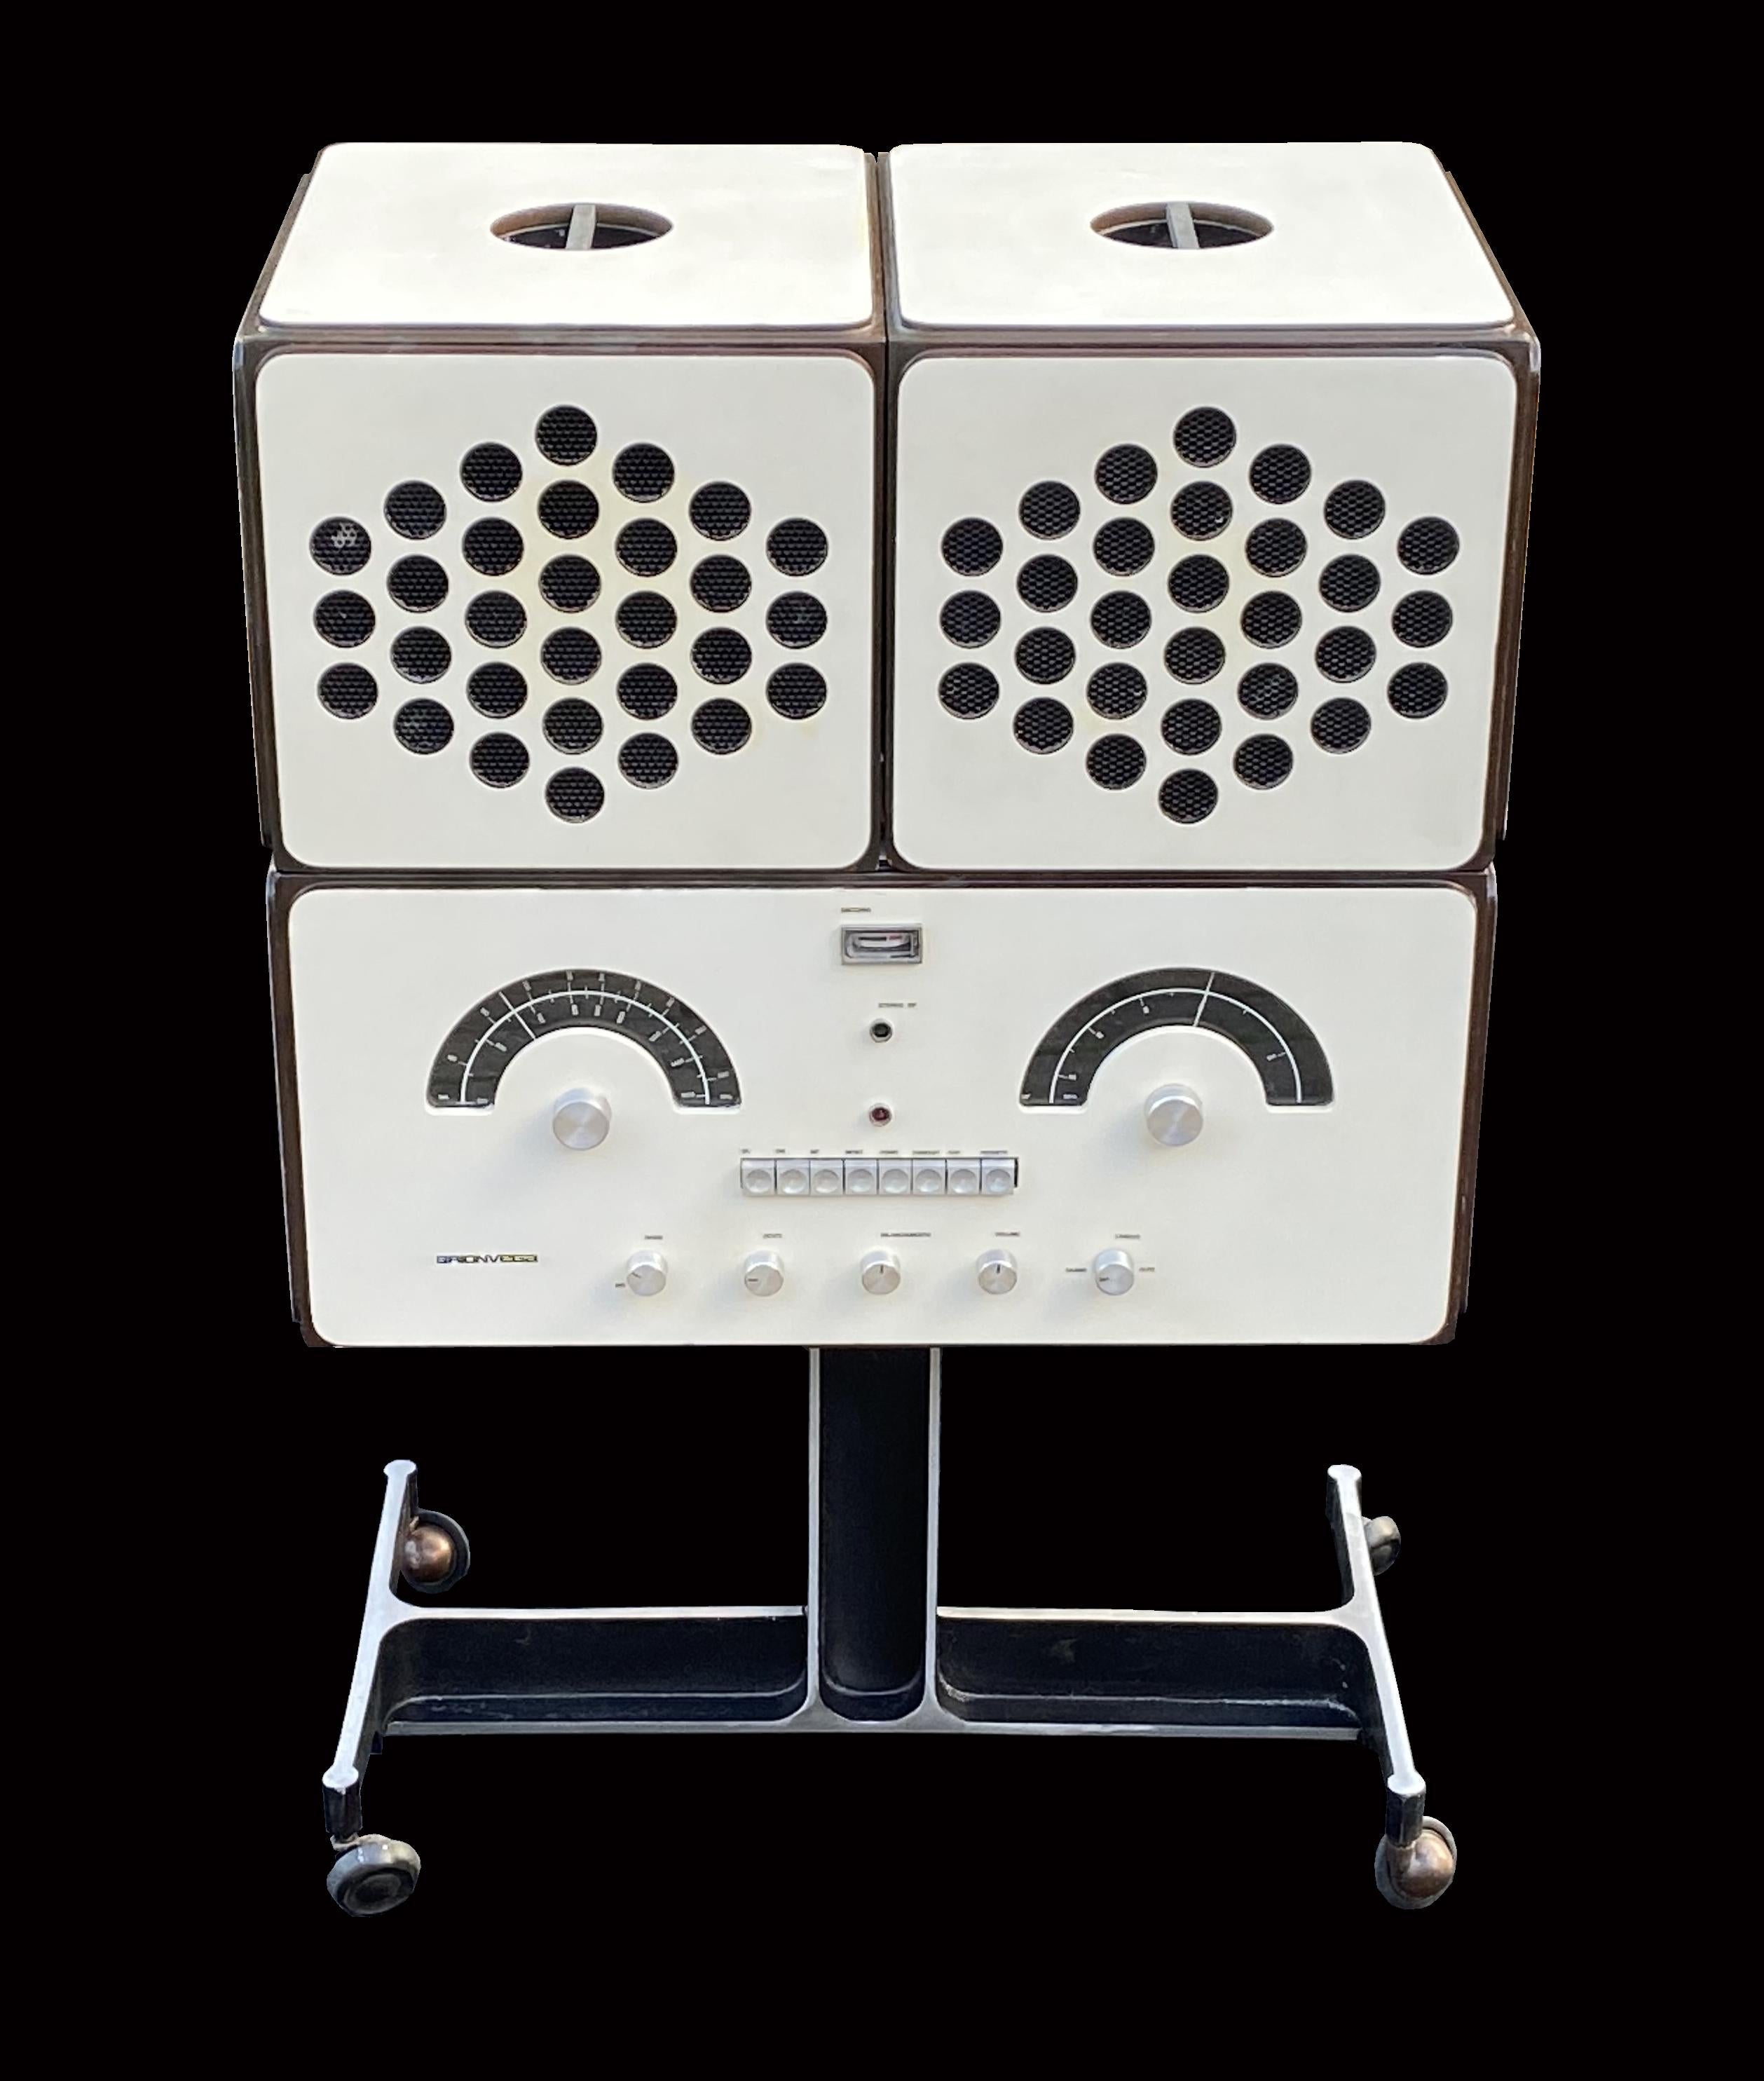 This Classic piece of Italian Design by Achille and Piergacomo Castiglioni for Brionvega.
An amazing item, stereo radio, and record player, with original Dual turntable, and having just been serviced is currently working fine, but one really owns